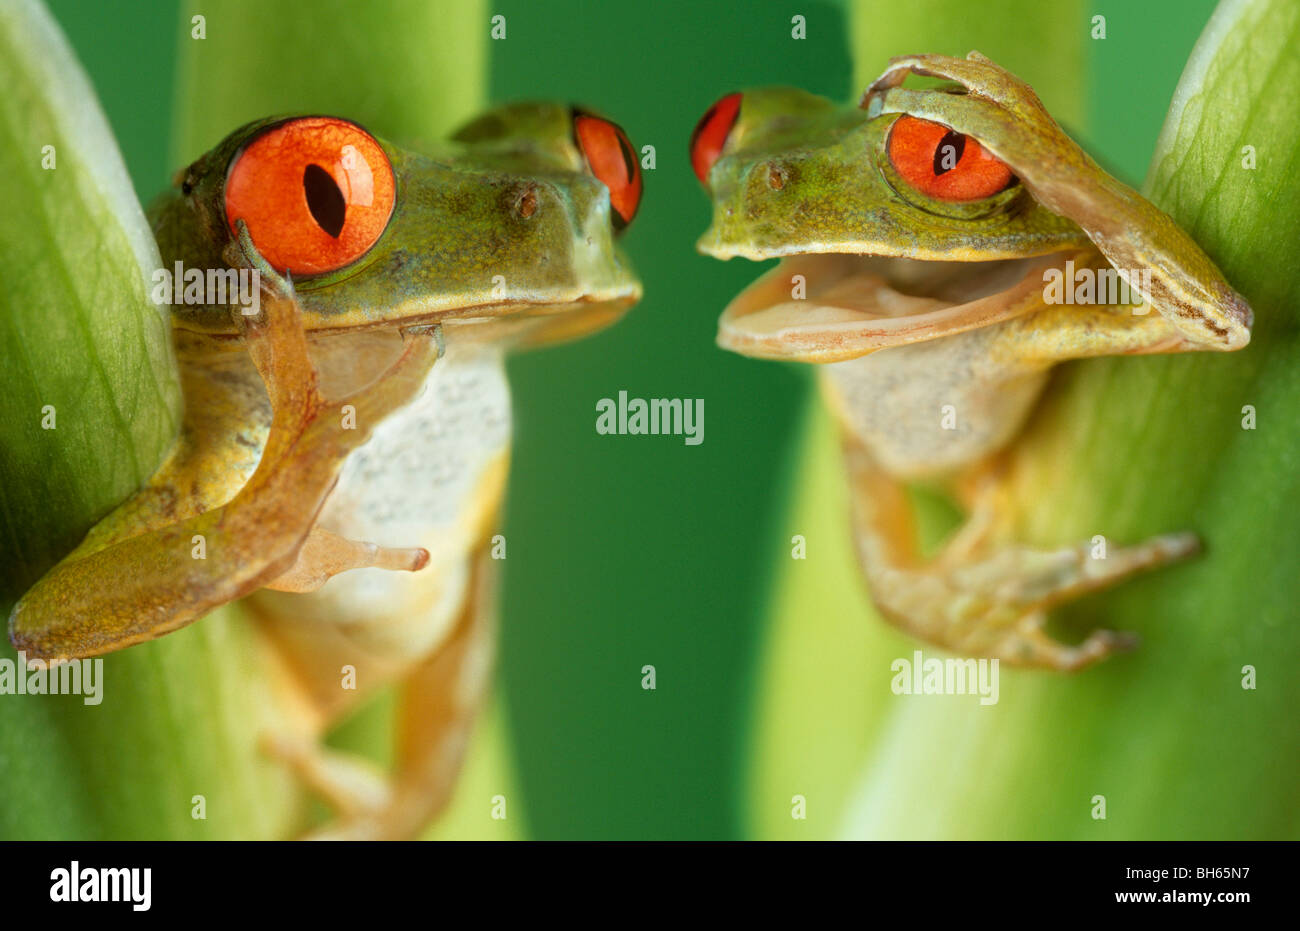 Two tree frogs looking animated Stock Photo